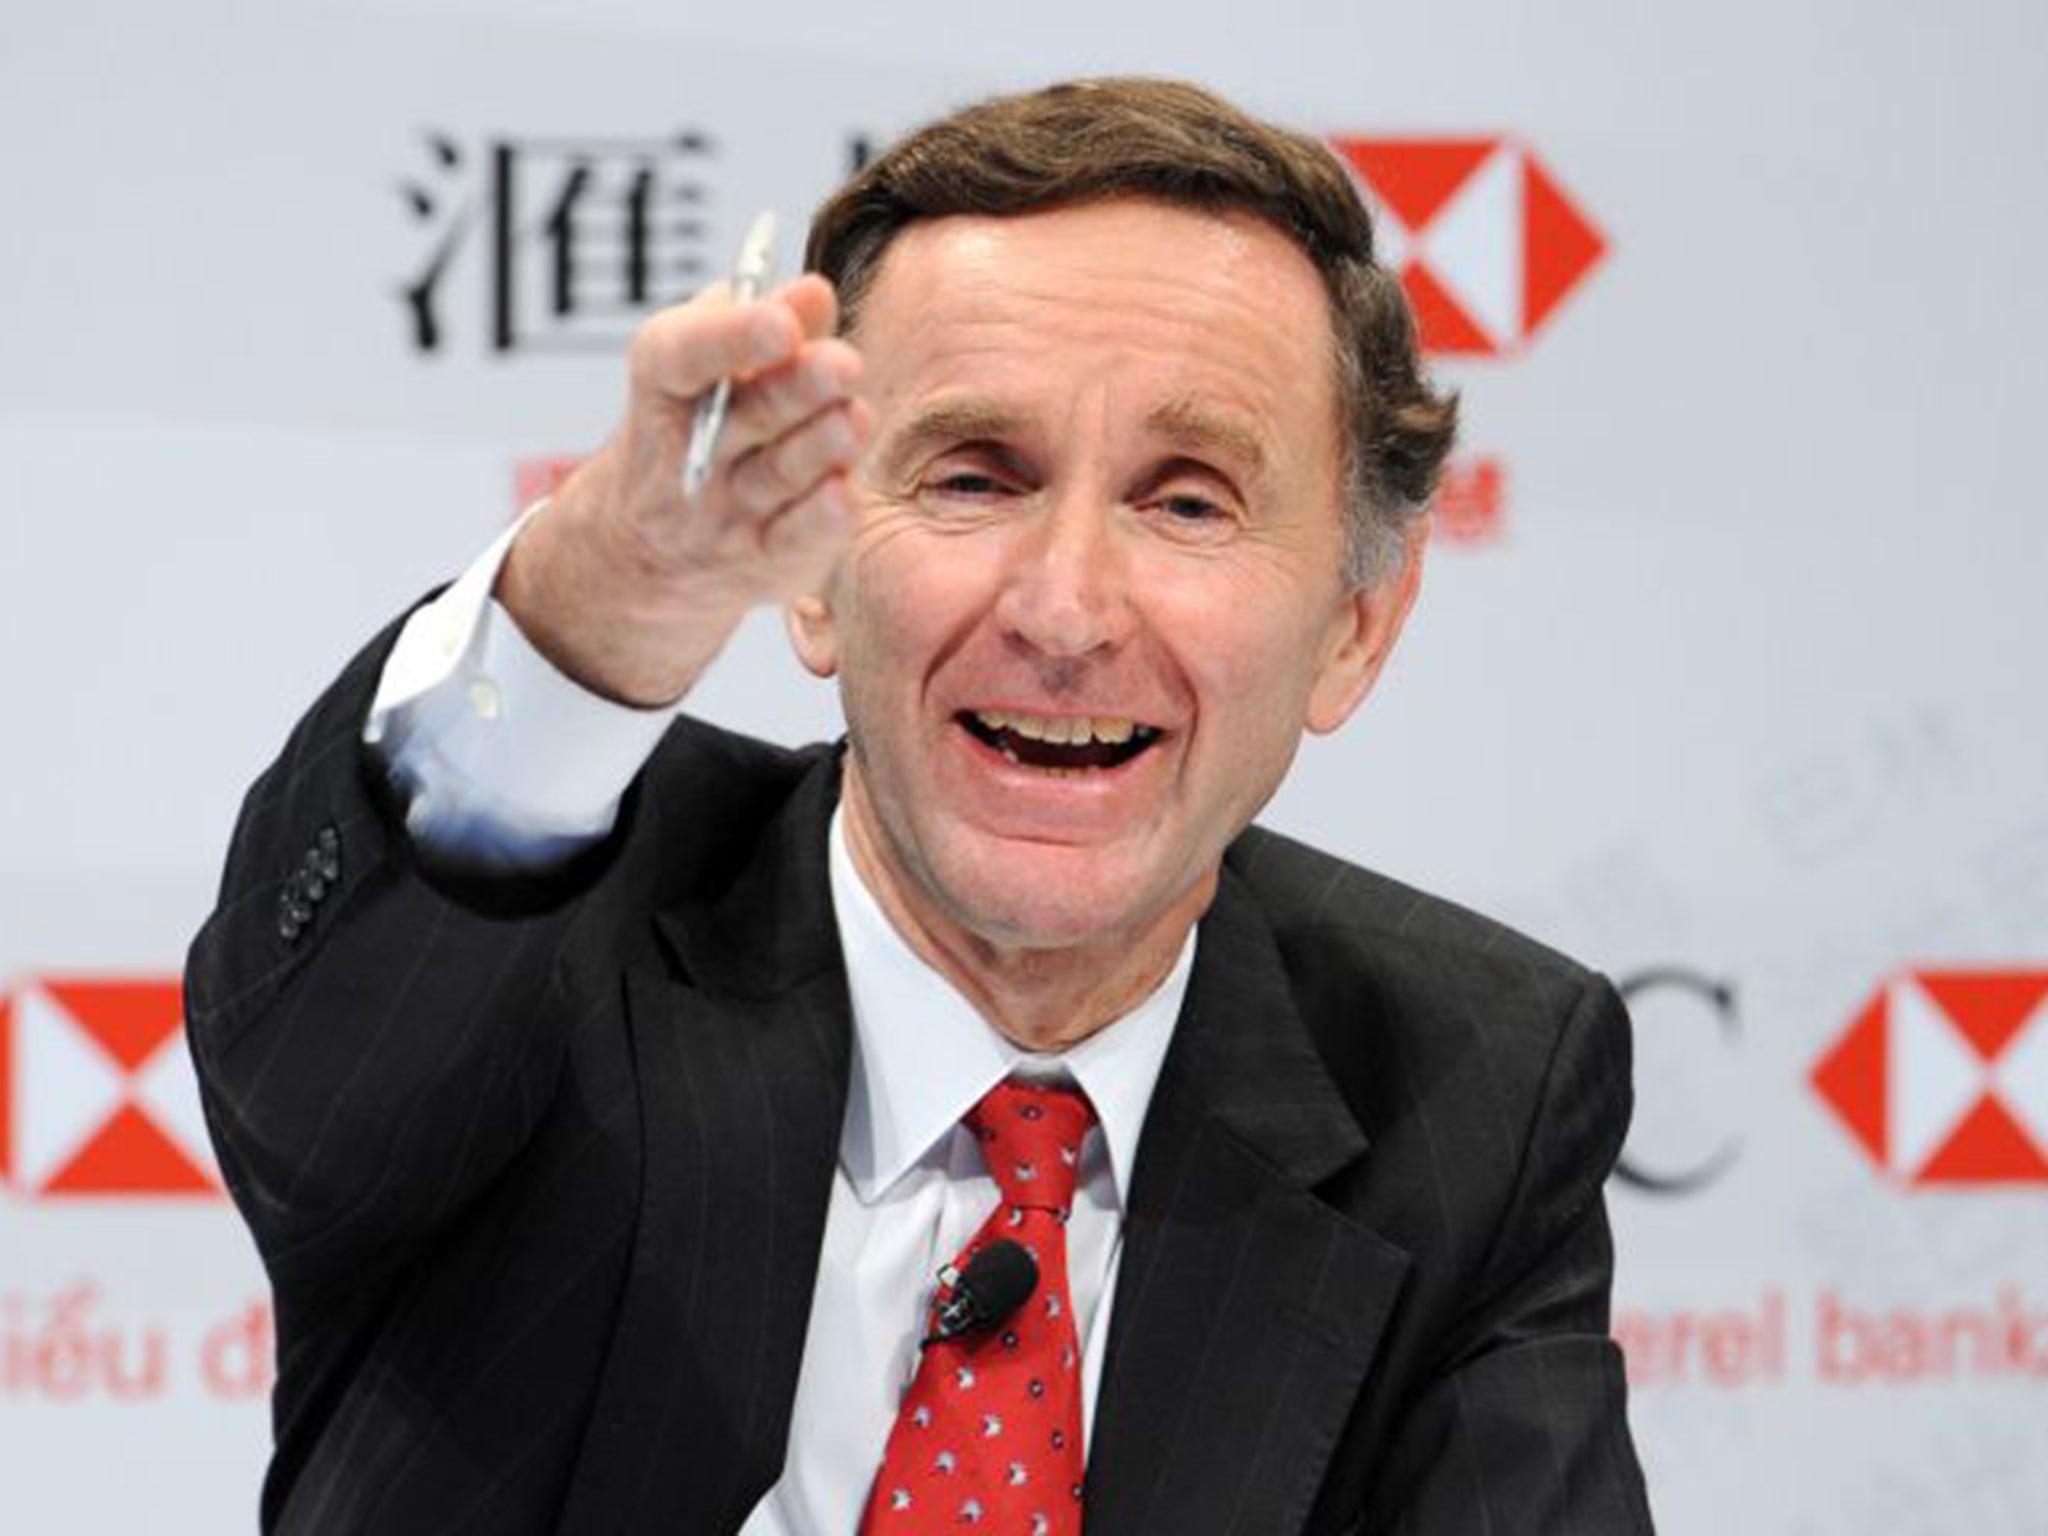 Stephen Green, the former HSBC boss and trade minister